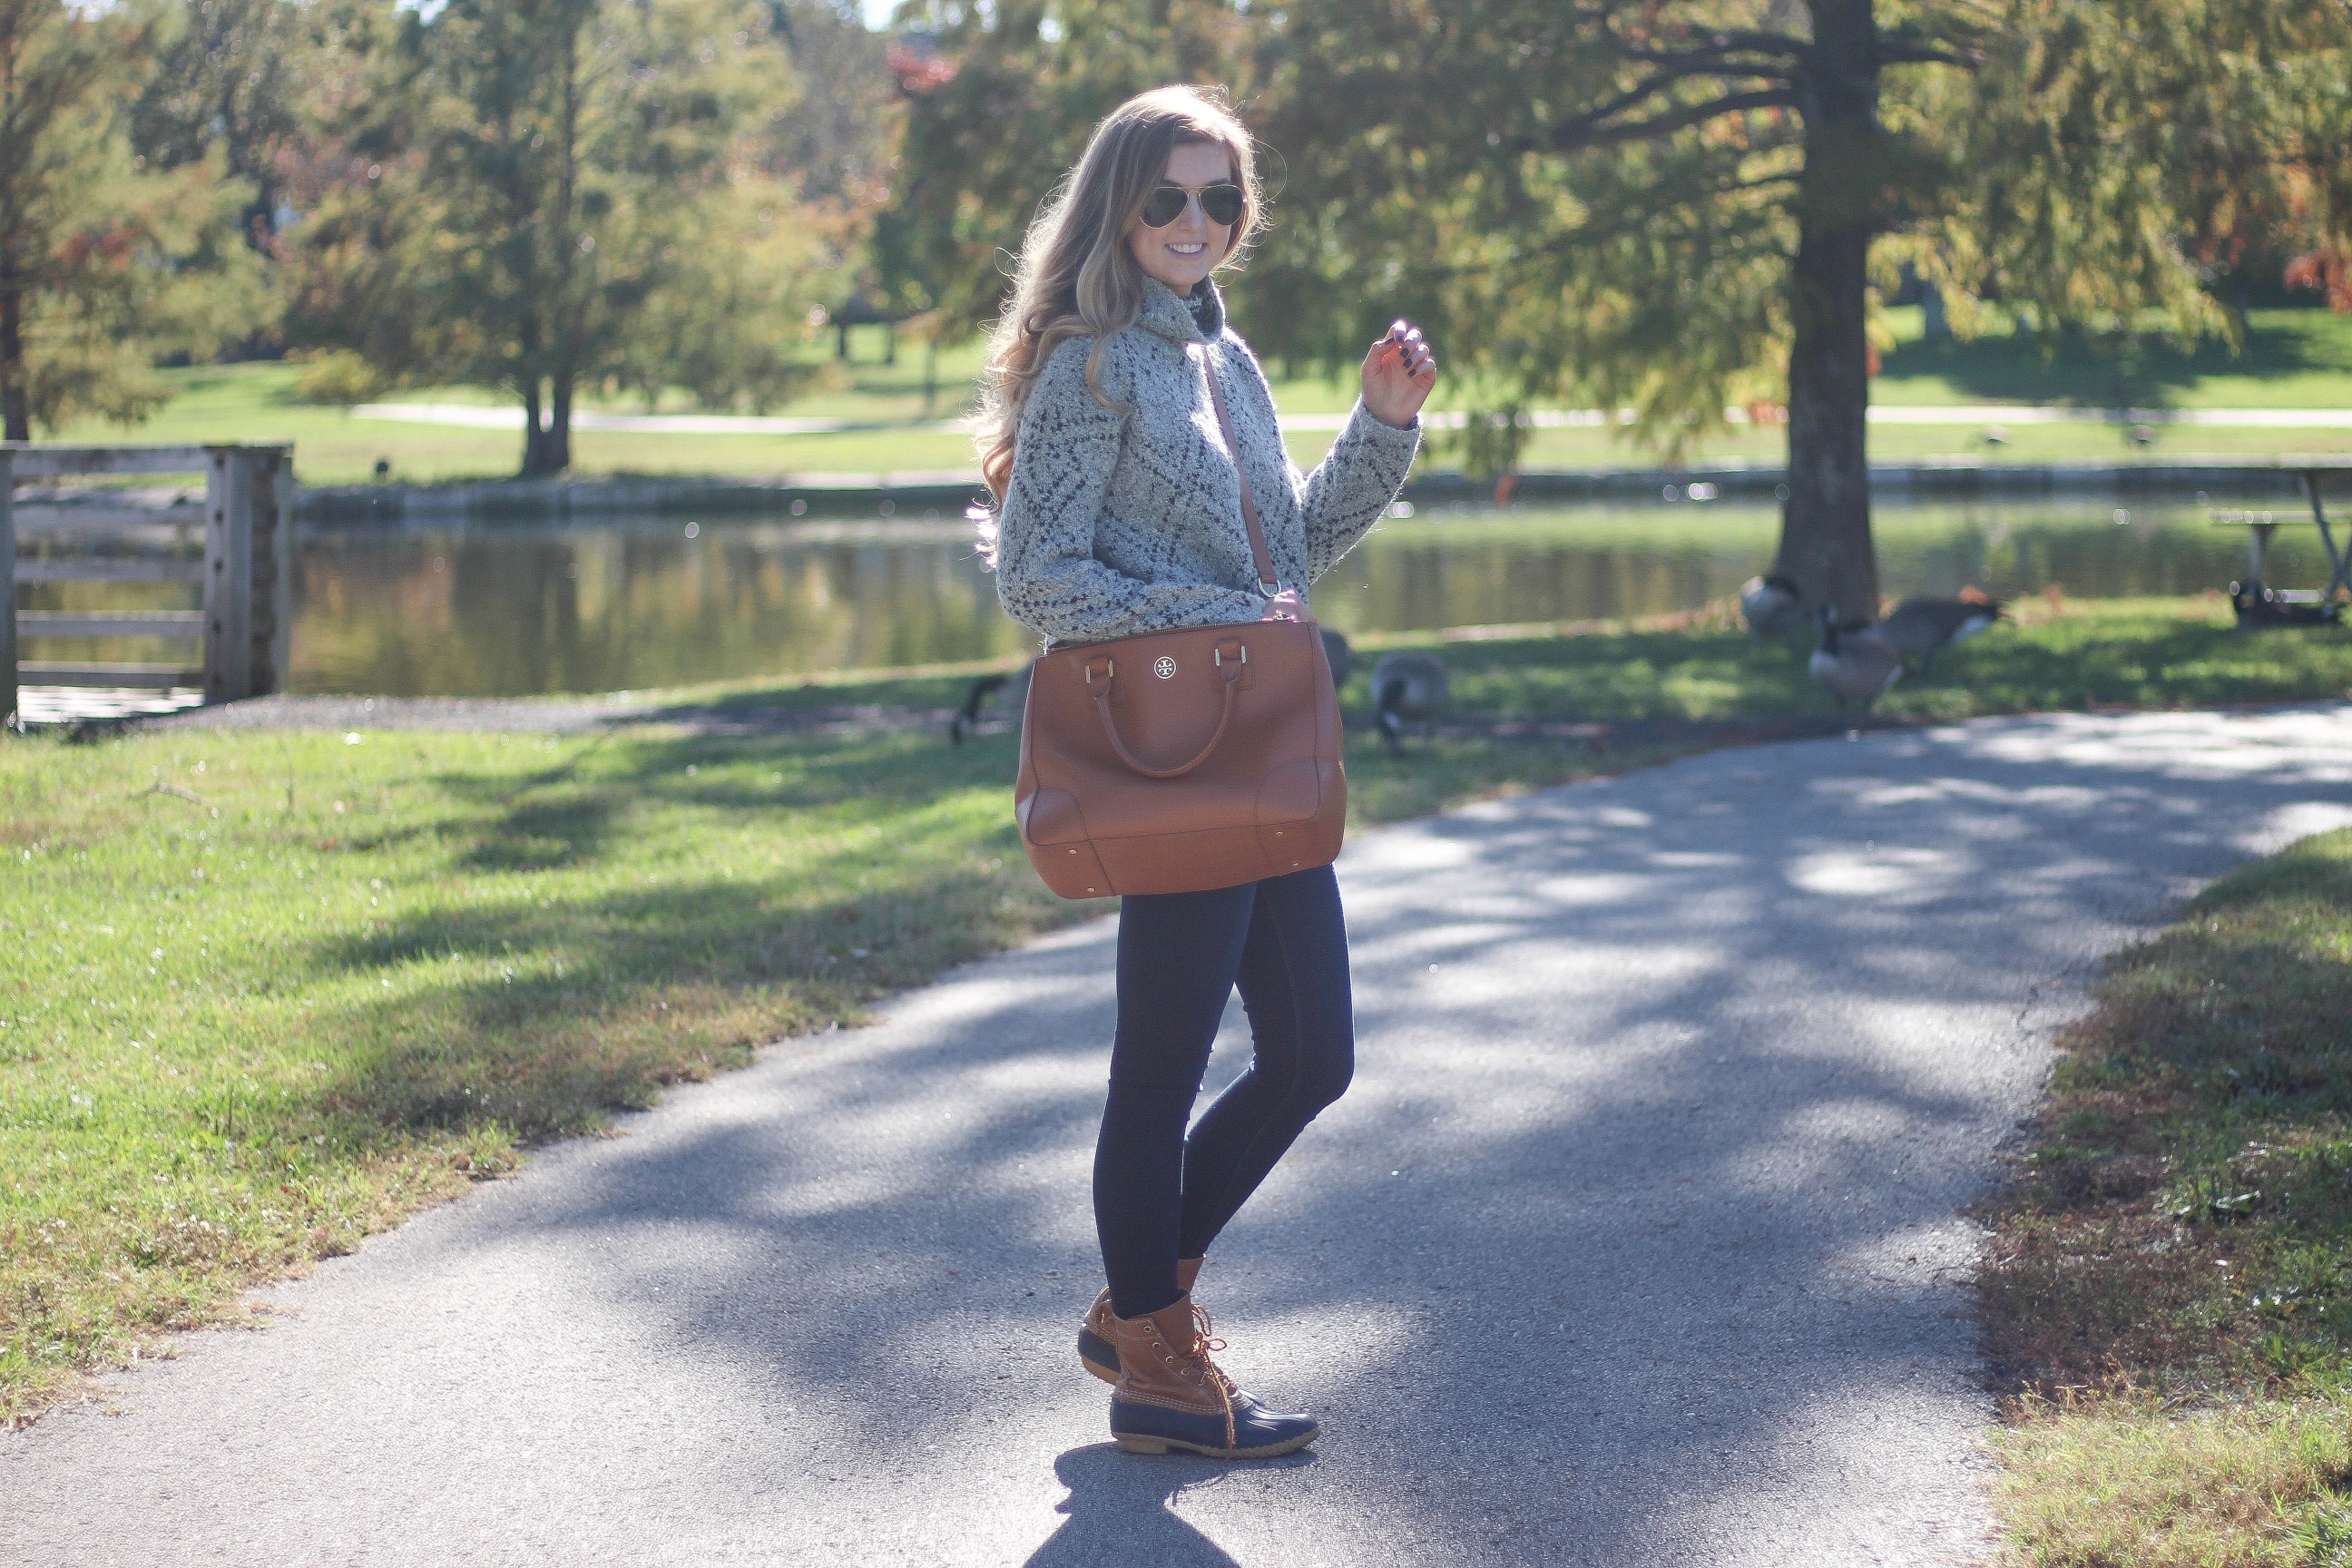 Fall sweater outfit of the day with tory burch tote, ray ban sunglasses, joie sweater, ll bean duck boots, by lauren landmark on daily dose of charm dailydoseofcharm.com (ALL DETAILS ON THE BLOG)